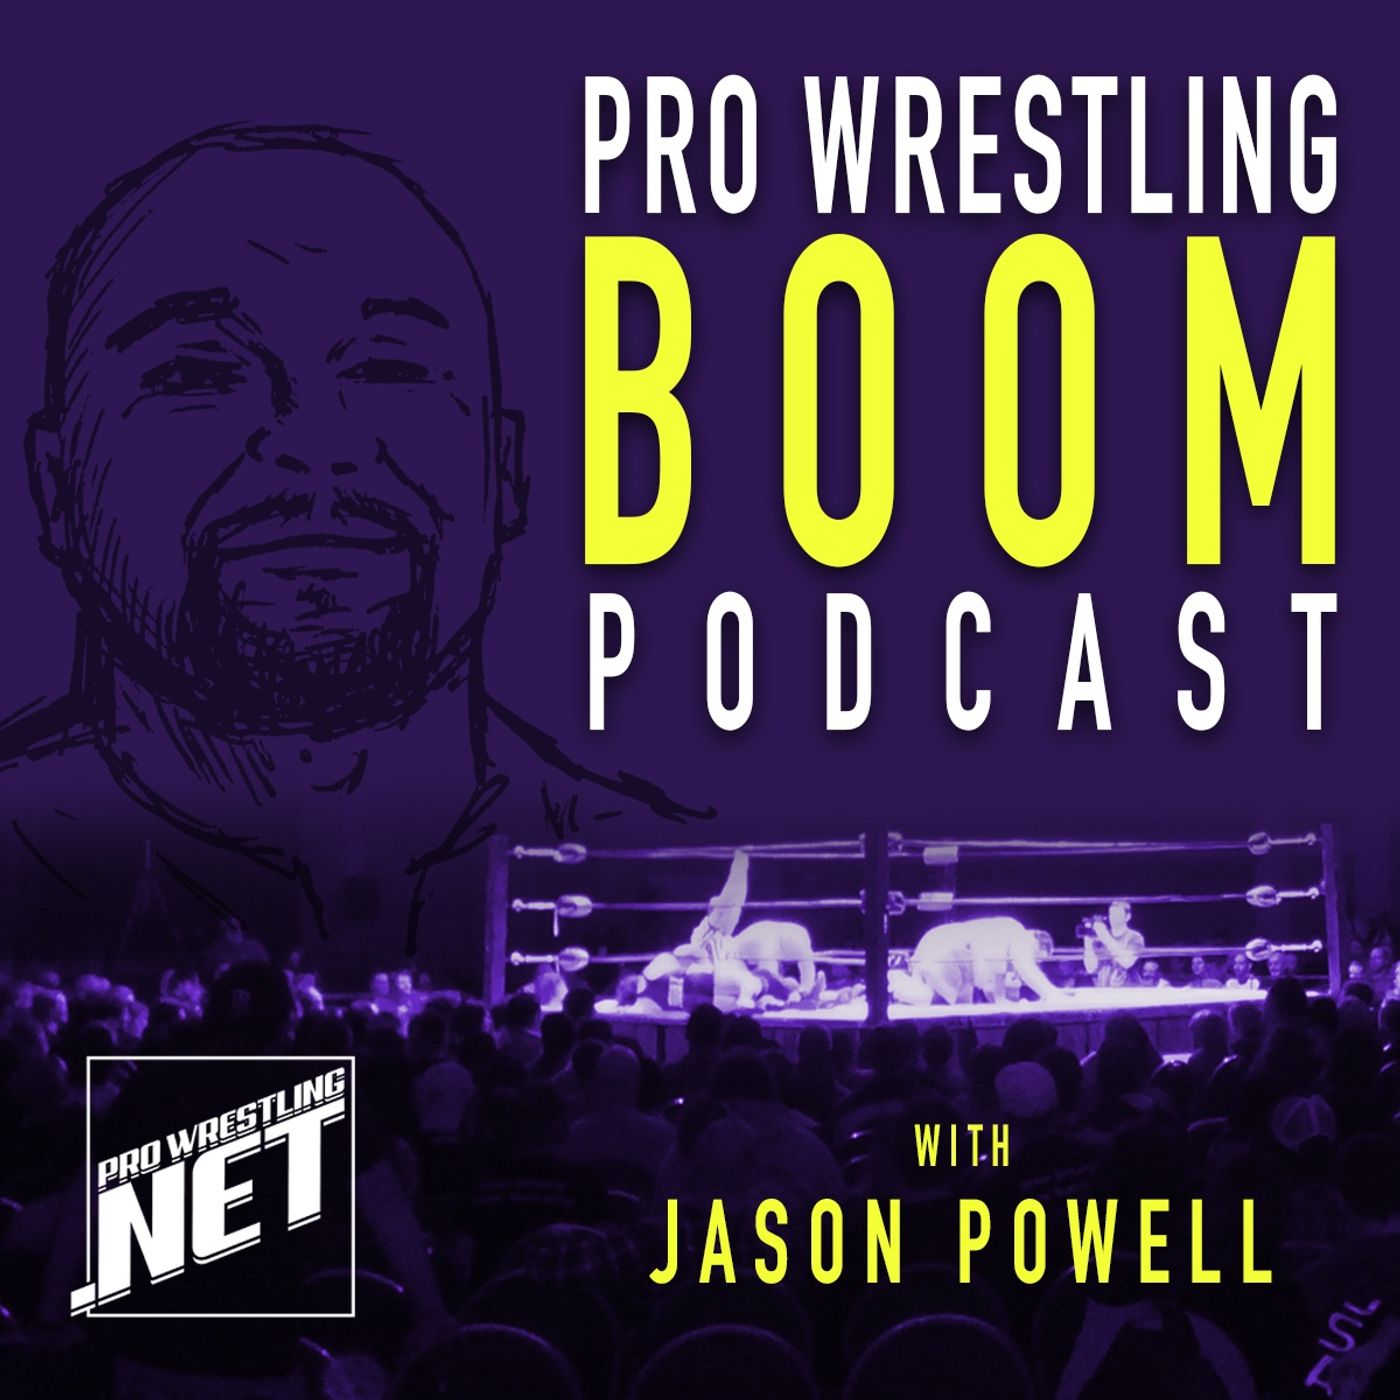 06/30 Pro Wrestling Boom Podcast With Jason Powell (Episode 164): Chris Dickinson on working for ROH and NJPW Strong